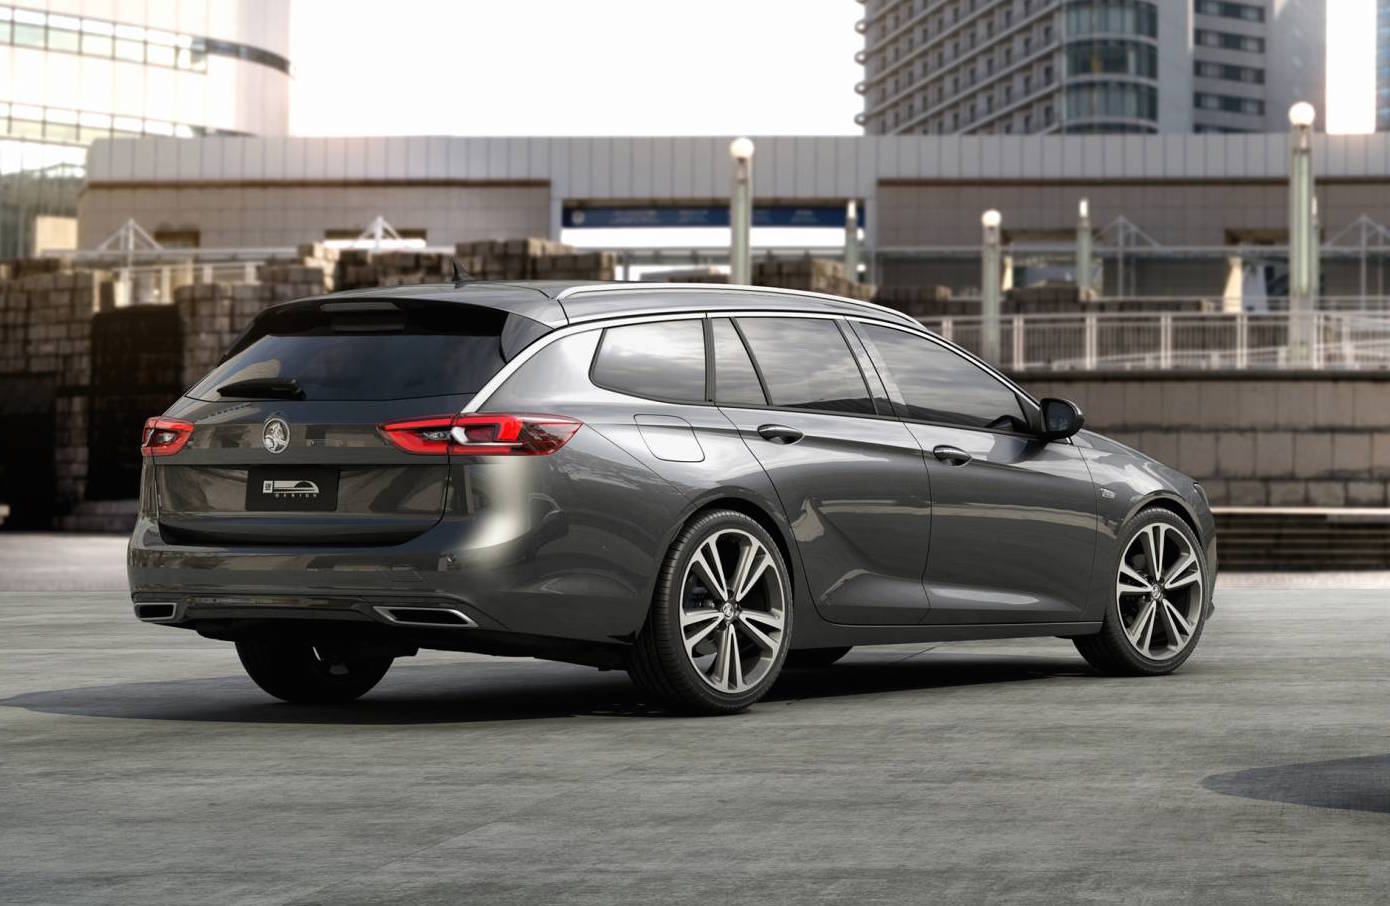 2018 Holden Commodore Sportwagon officially revealed